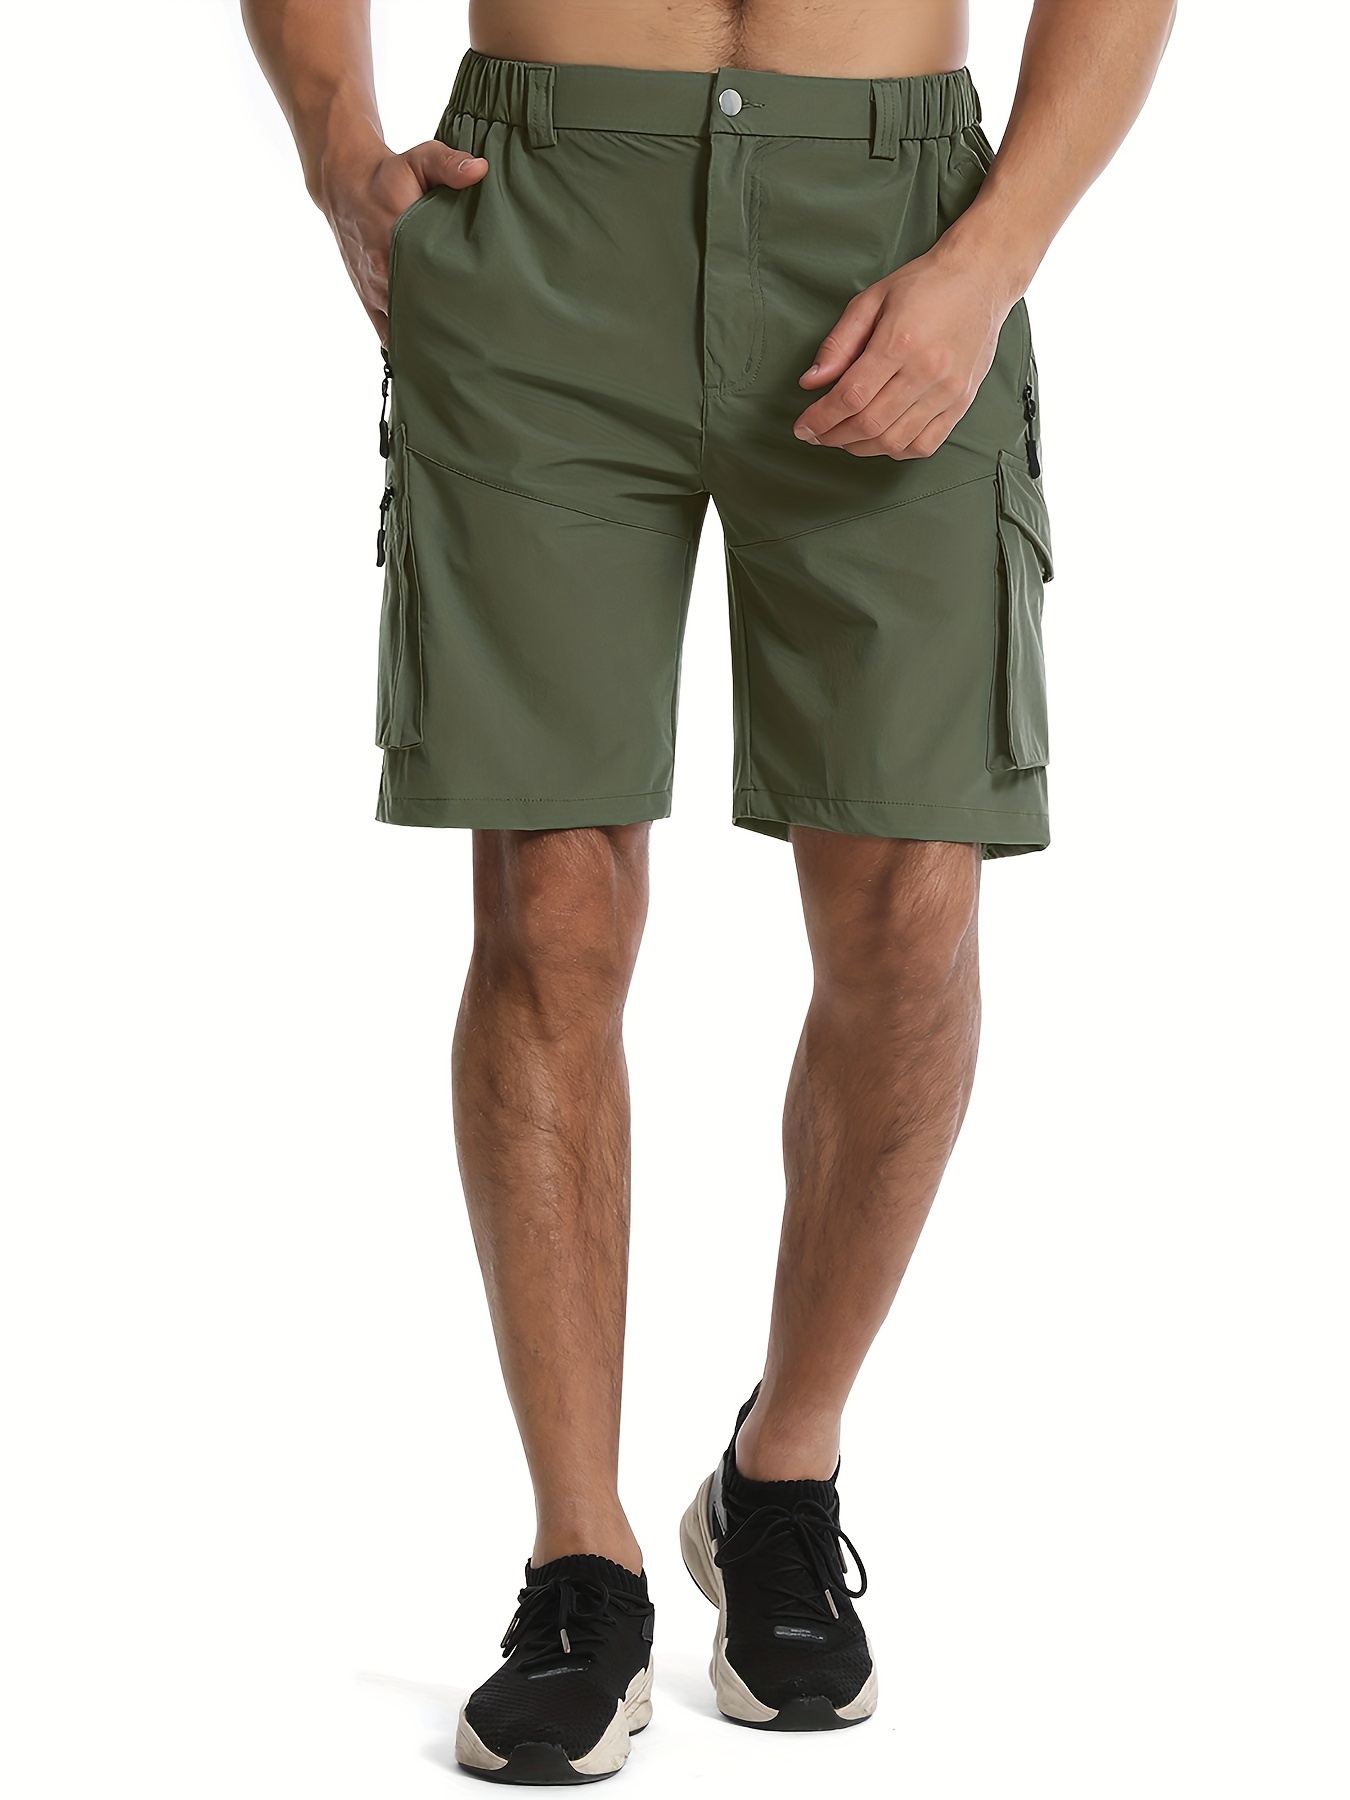 Men's Hiking Cargo Shorts Quick Dry Outdoor Travel Shorts for Men